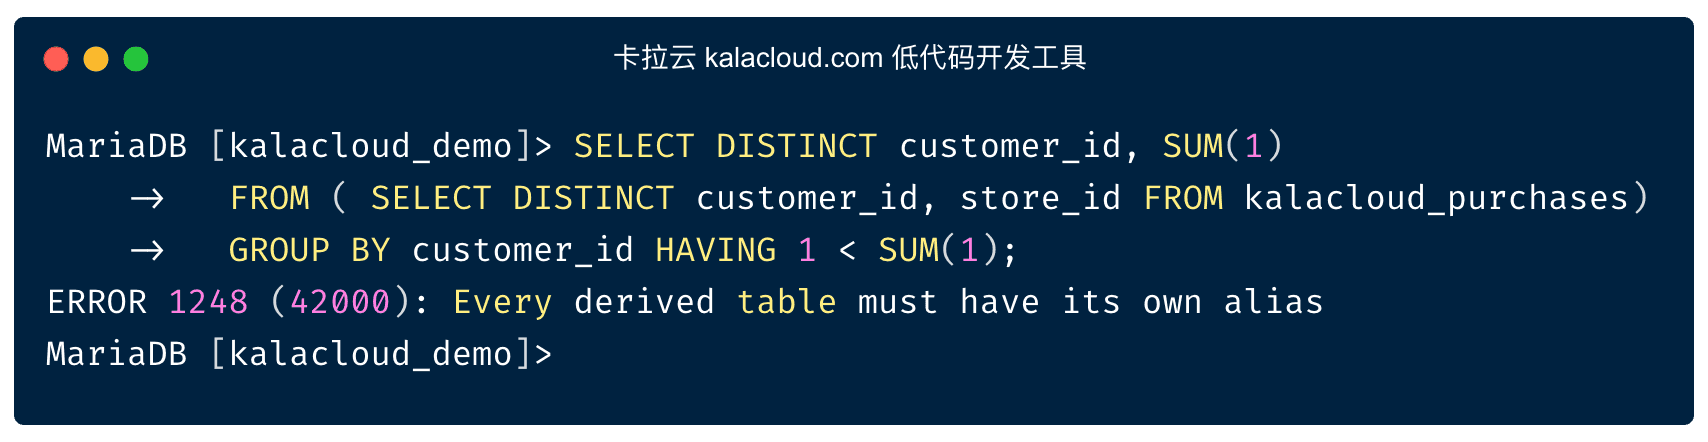 every-derived-table-must-have-its-own-alias 1248 错误